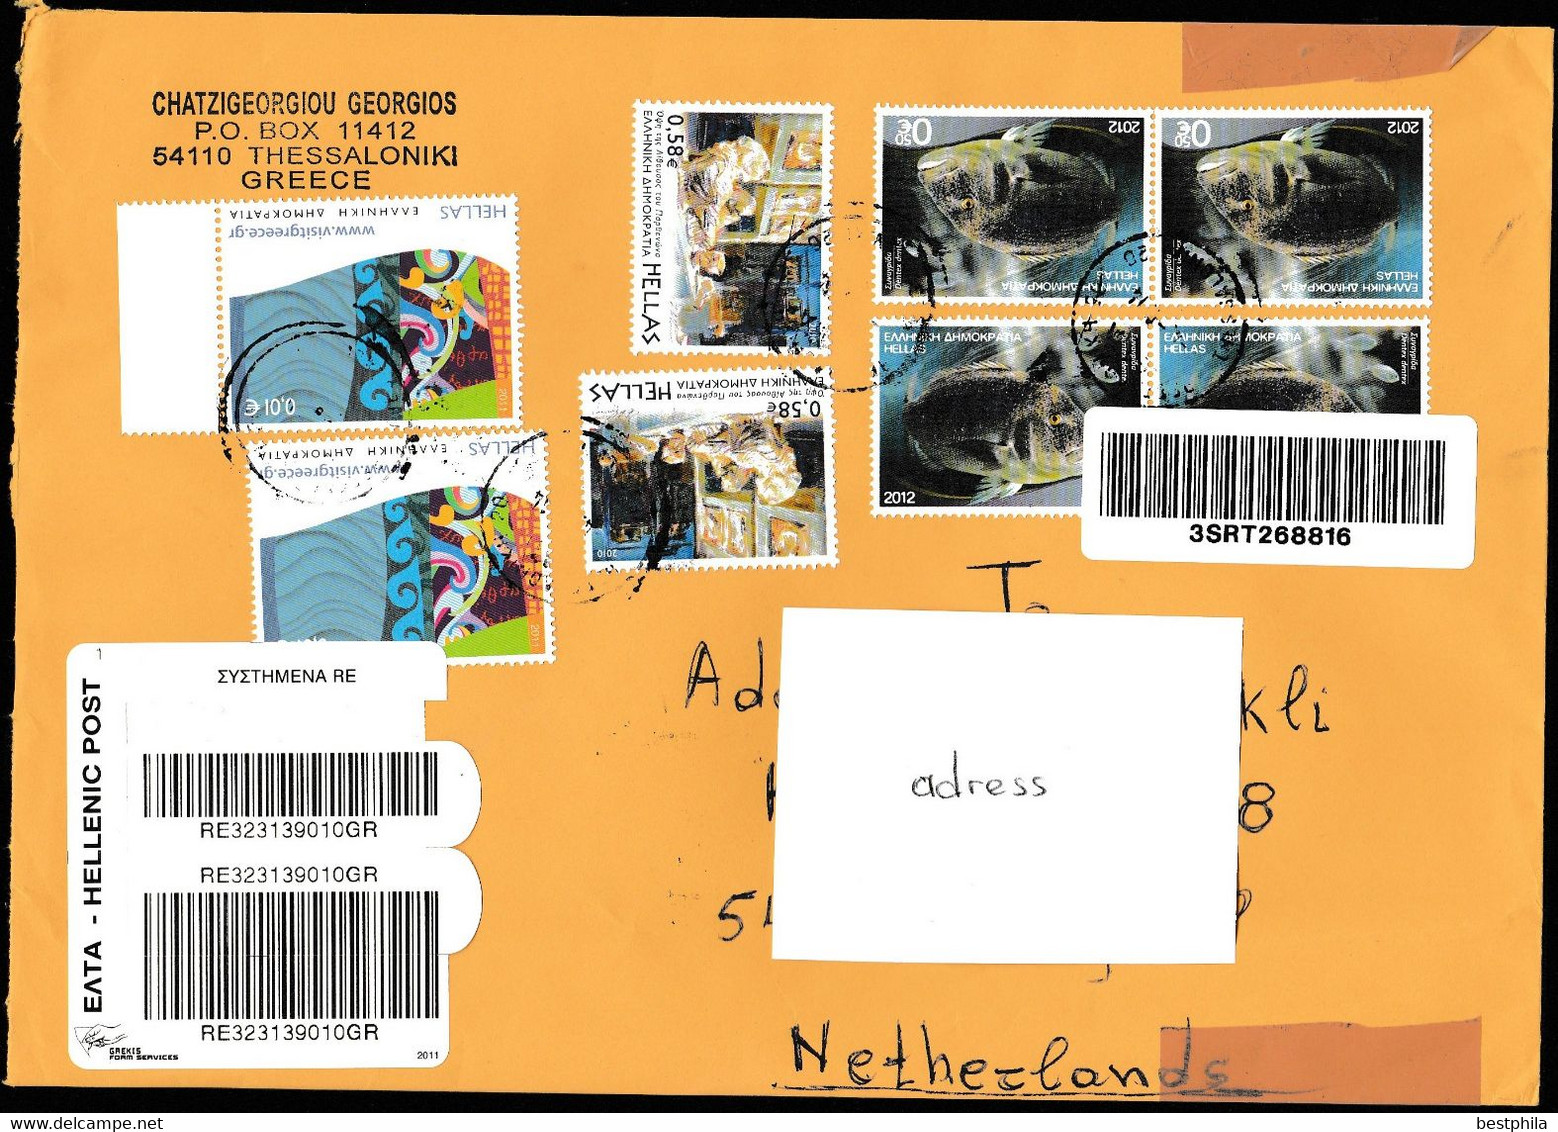 Greece, Griekenland - Postal History & Philatelic Cover With Registered Letter - 136 - Covers & Documents